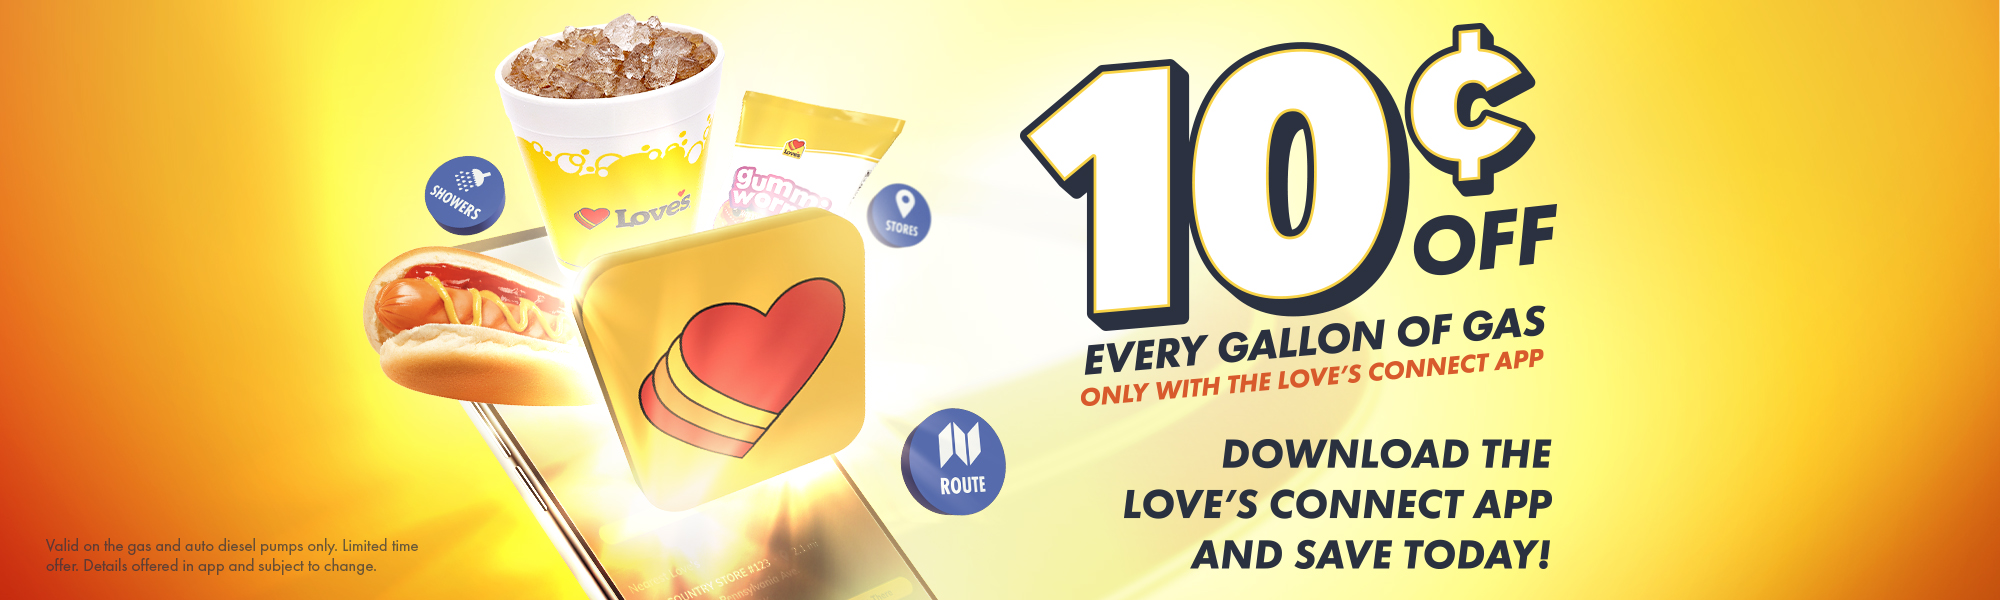 Save 10¢ on ever gallon of gas with the Love's Connect App